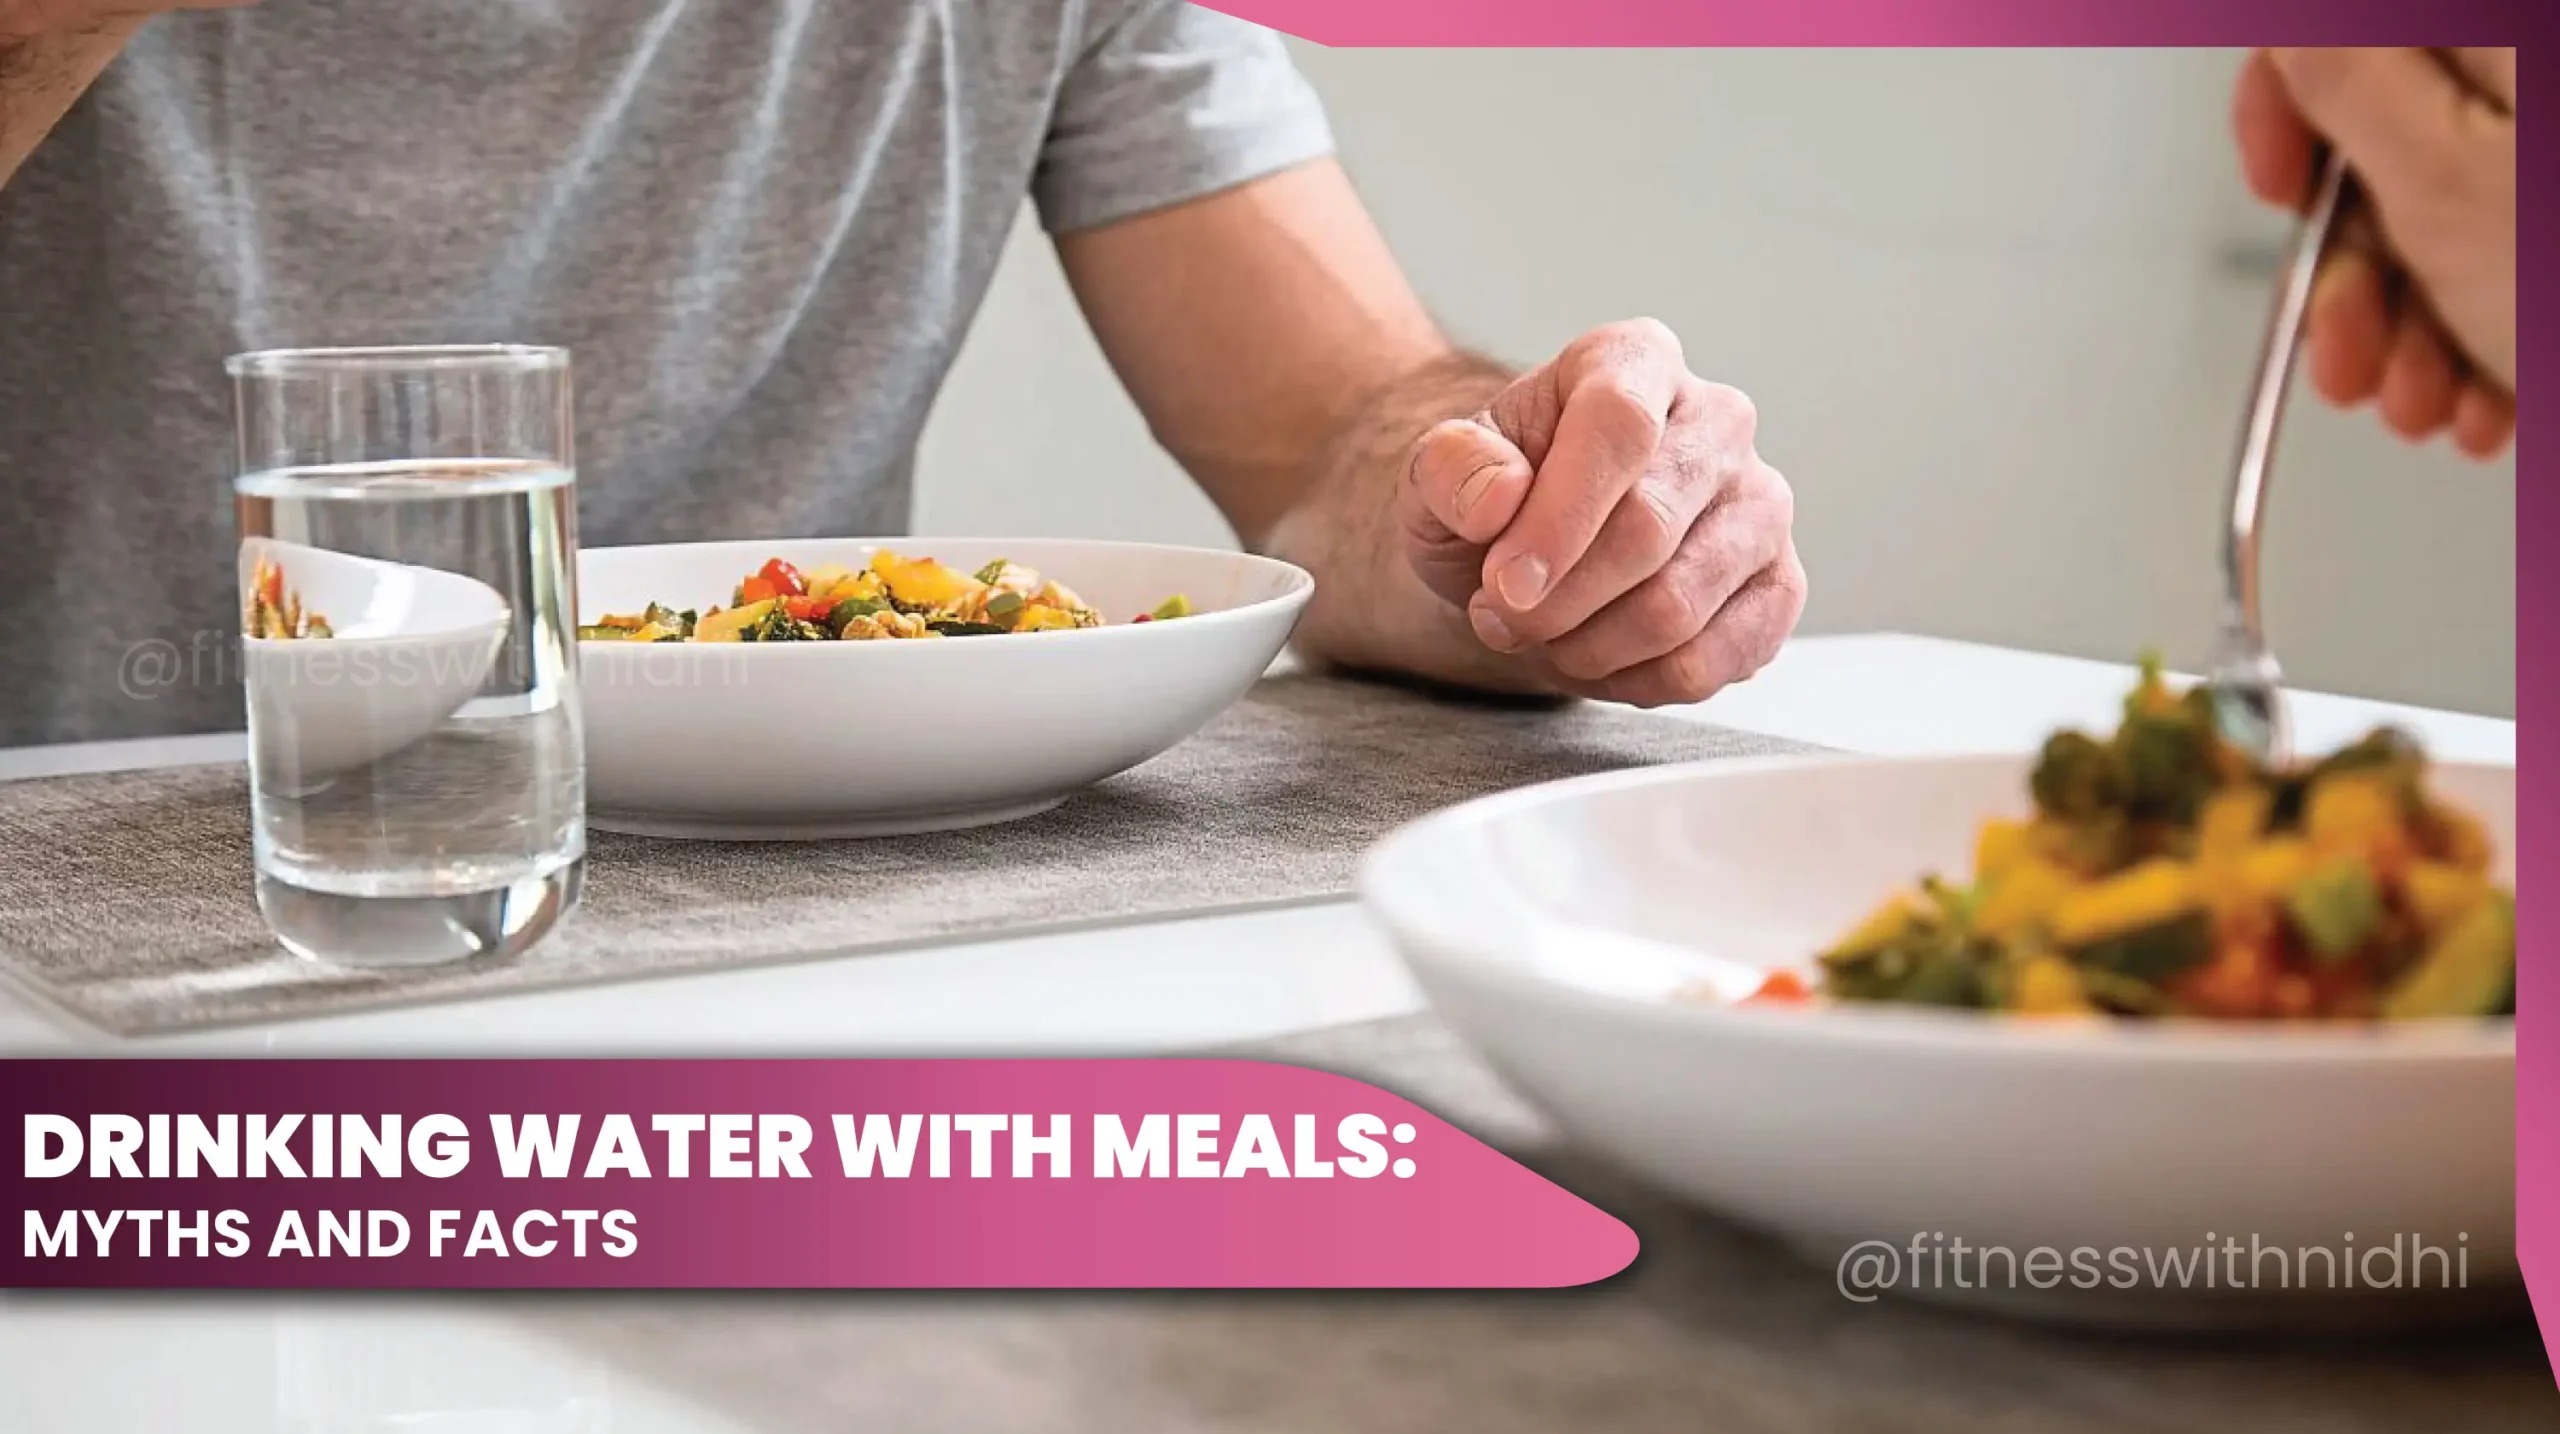 11all myths and facts about drinking water with meal